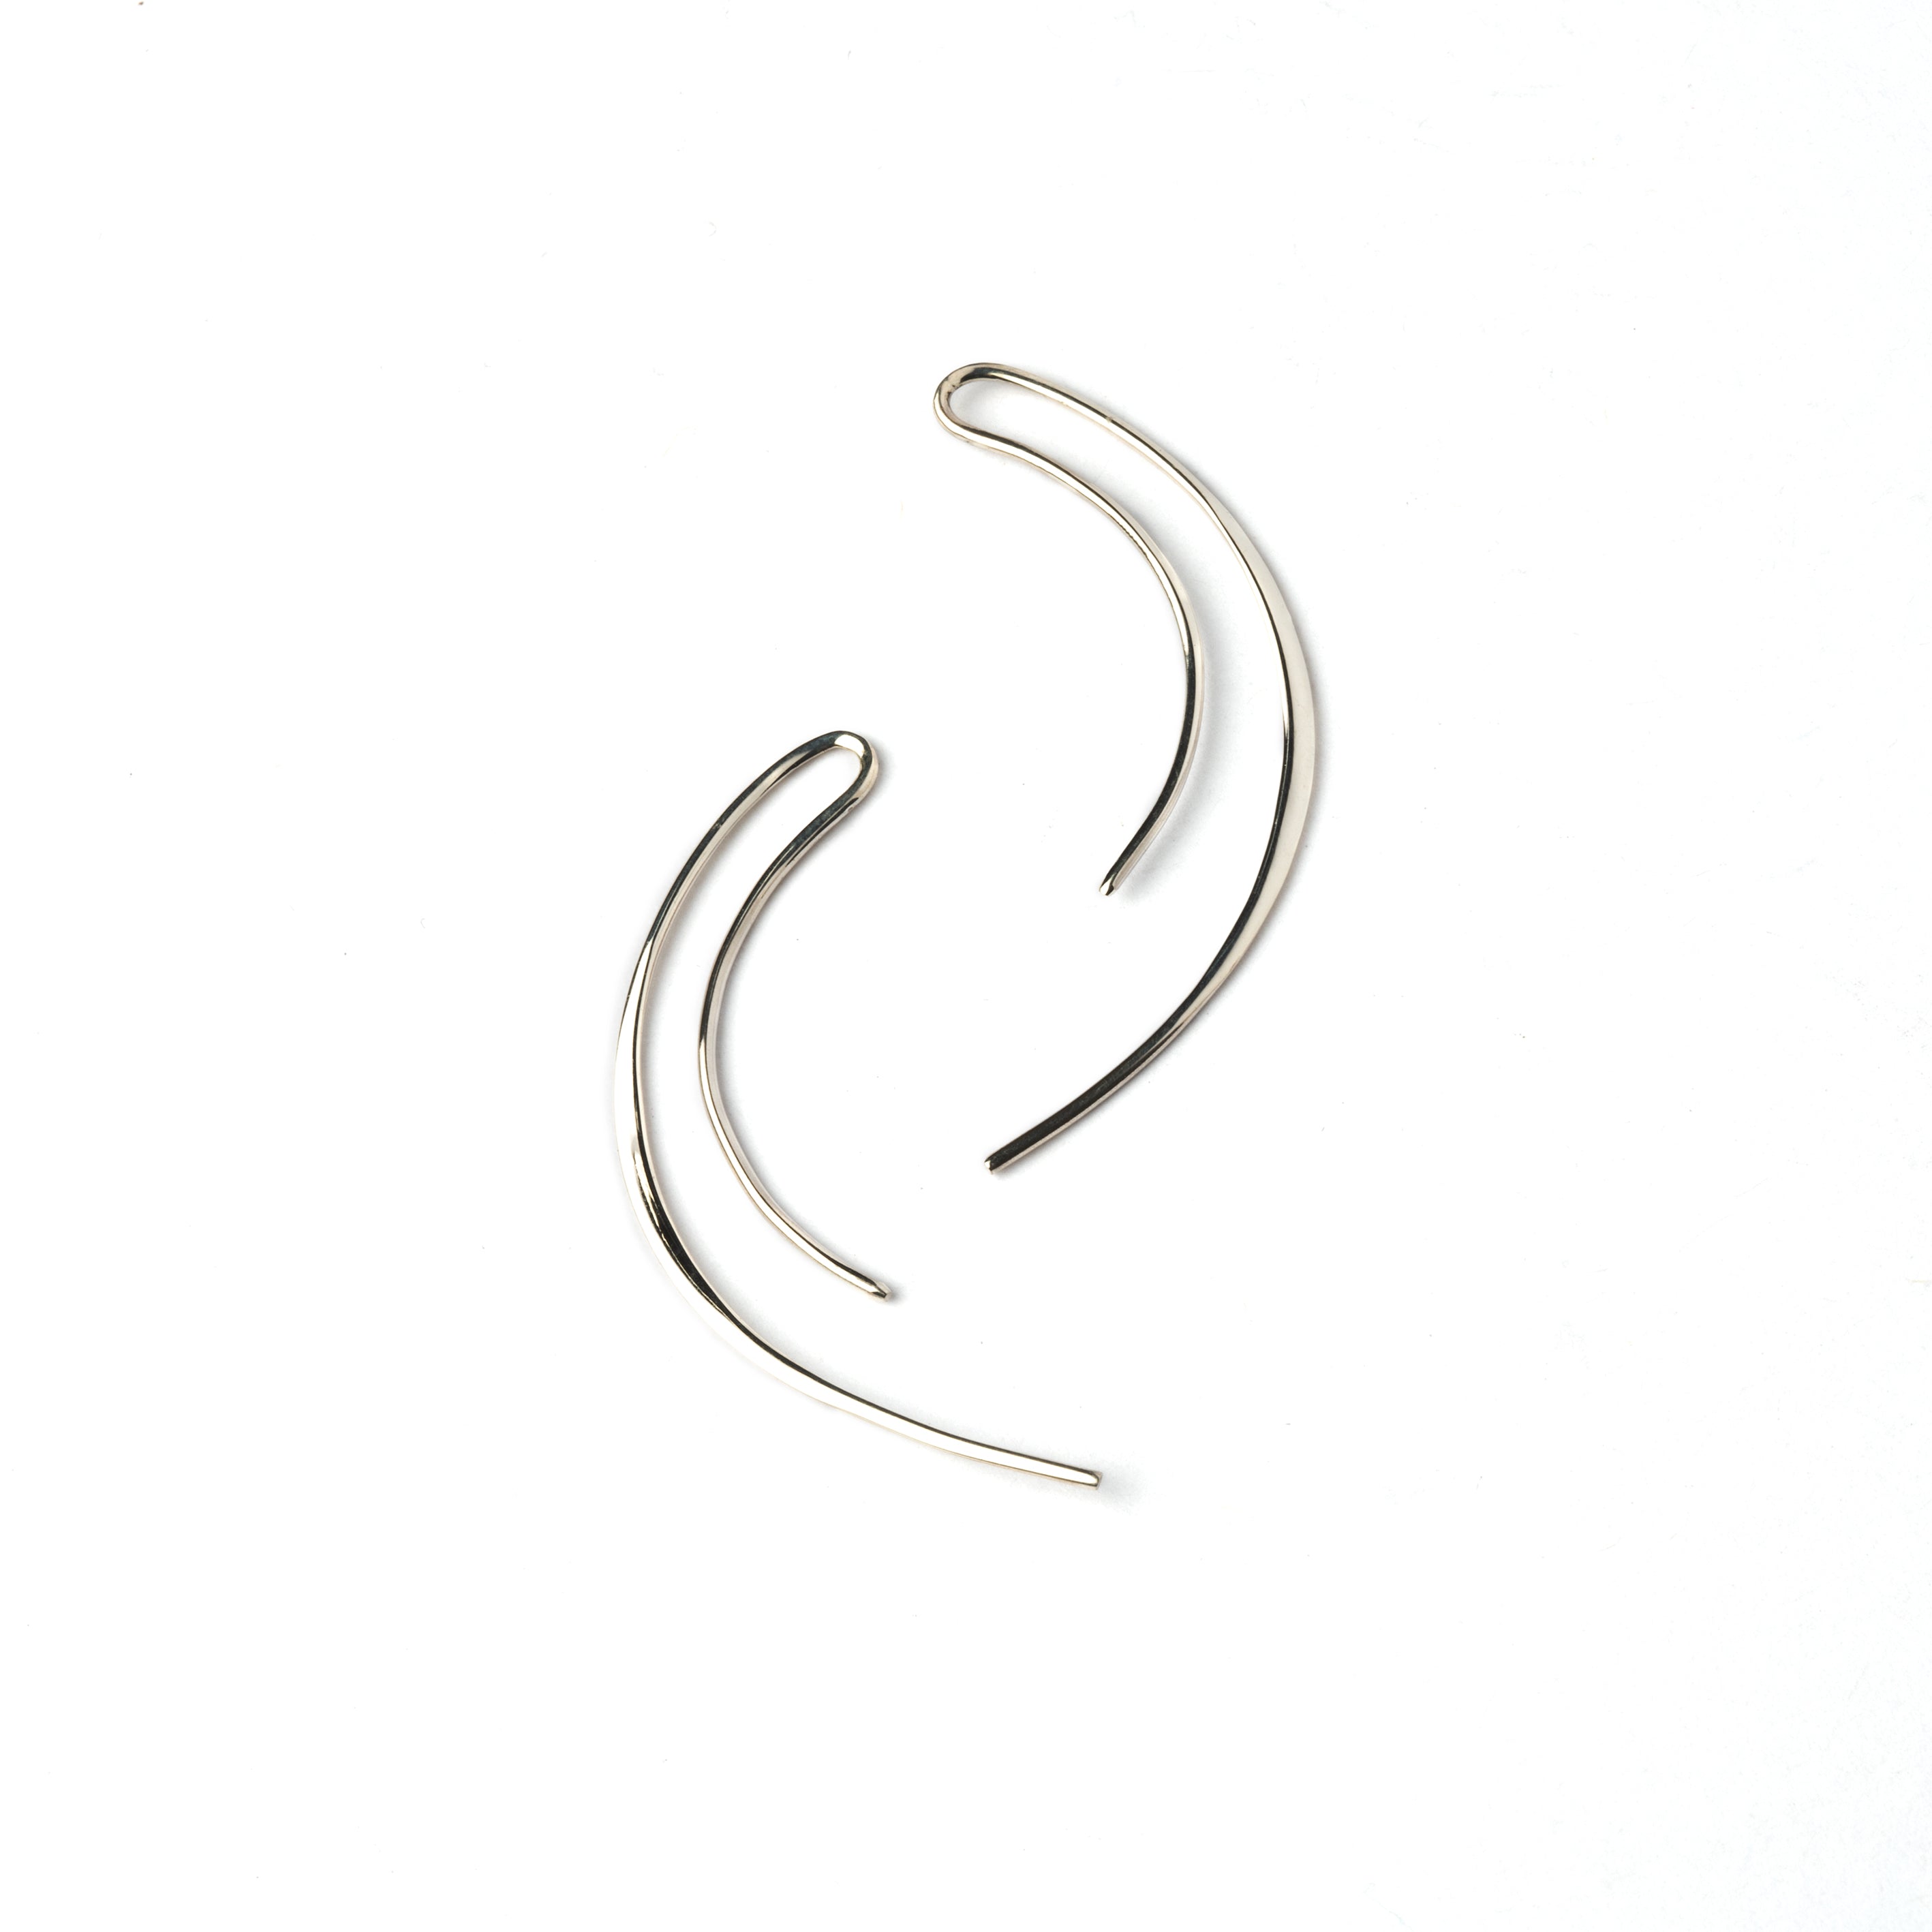 Silver Bent Wire Earrings frontal view